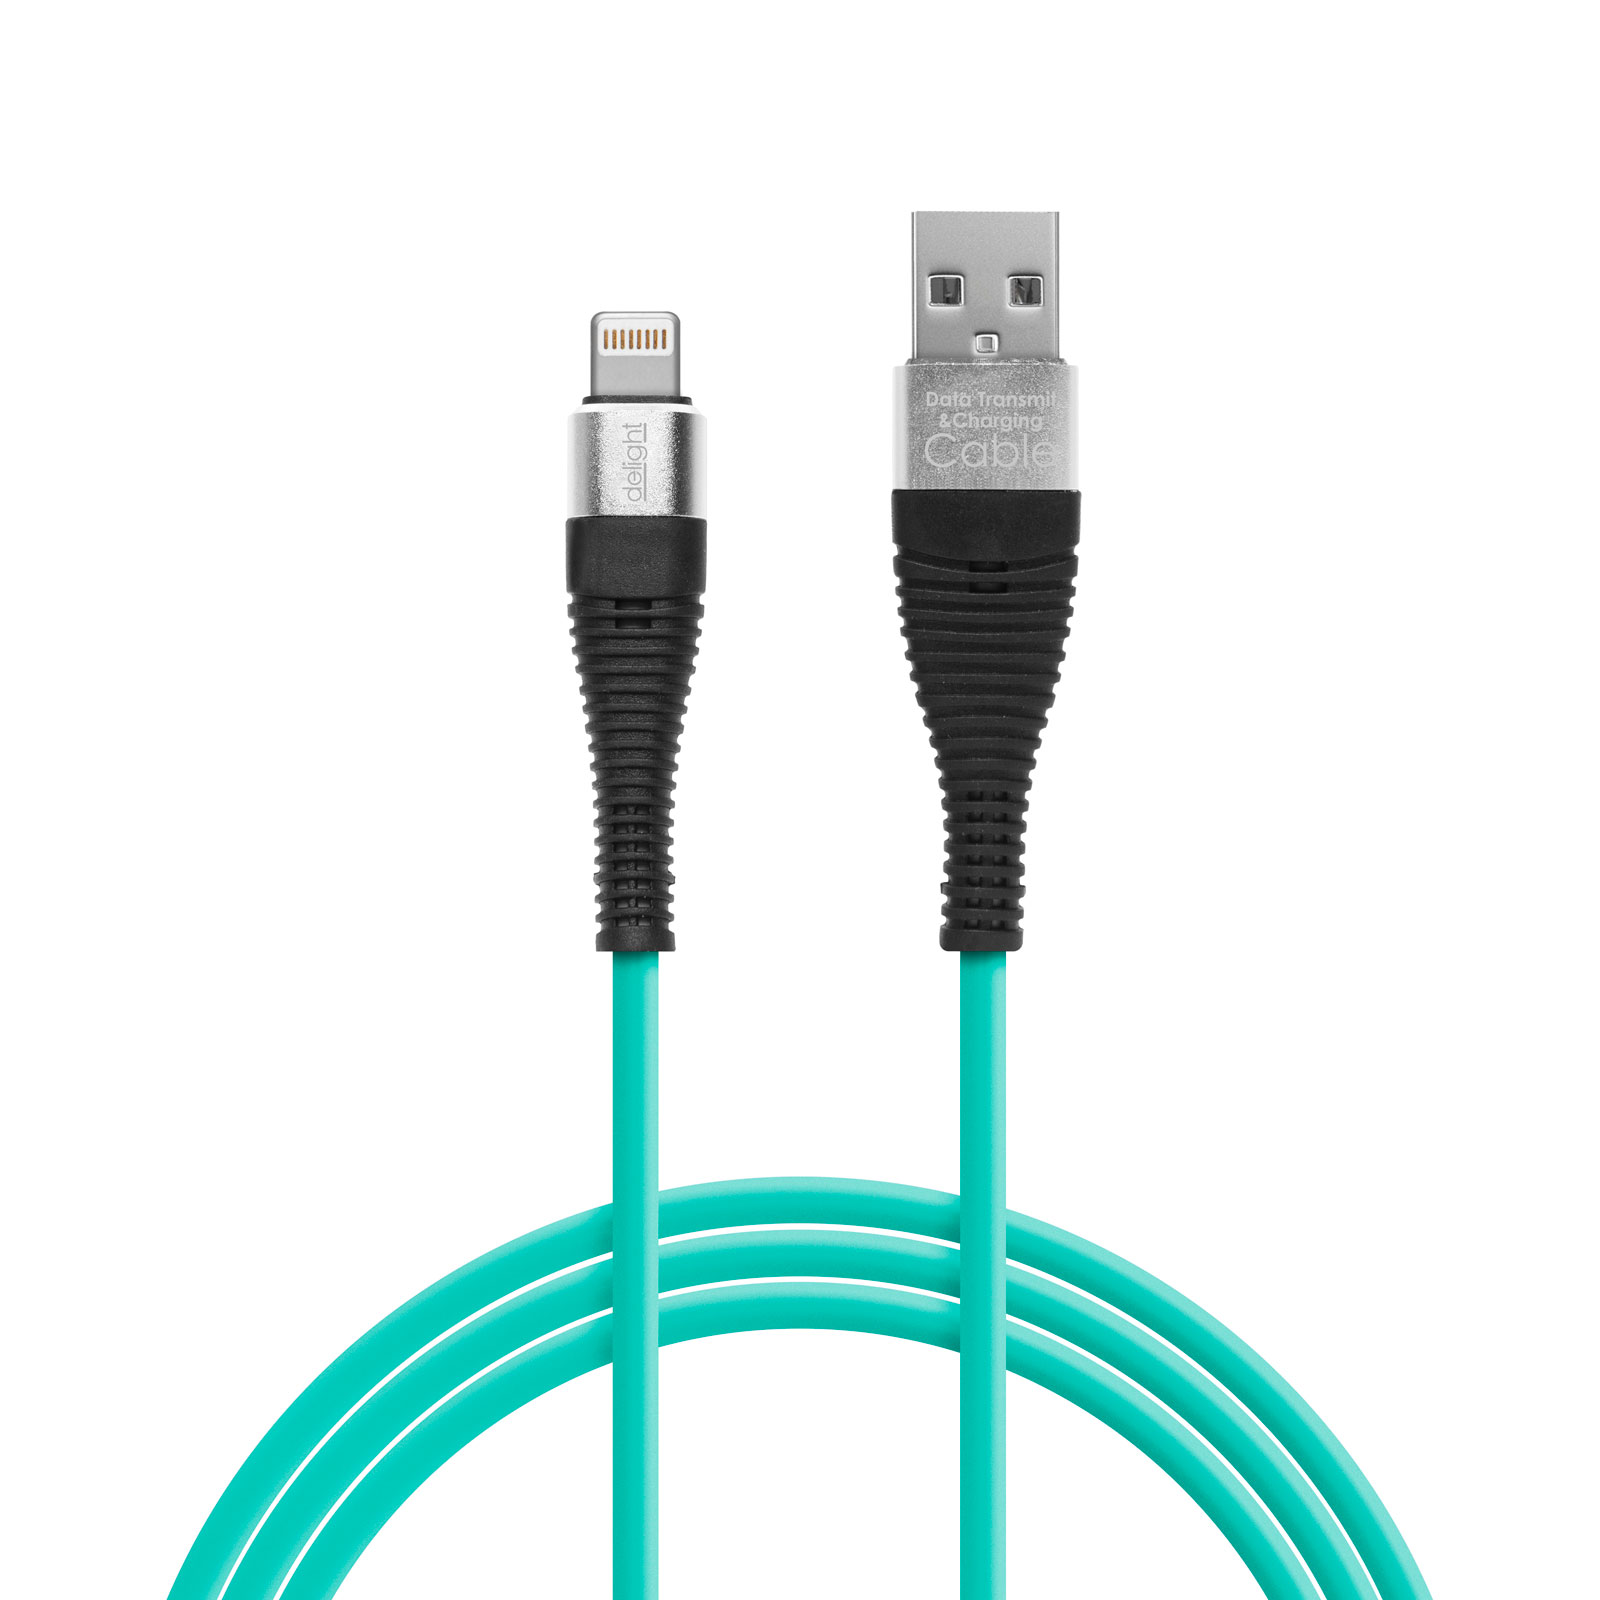 Data cable for iPhone - "lightning" thumb